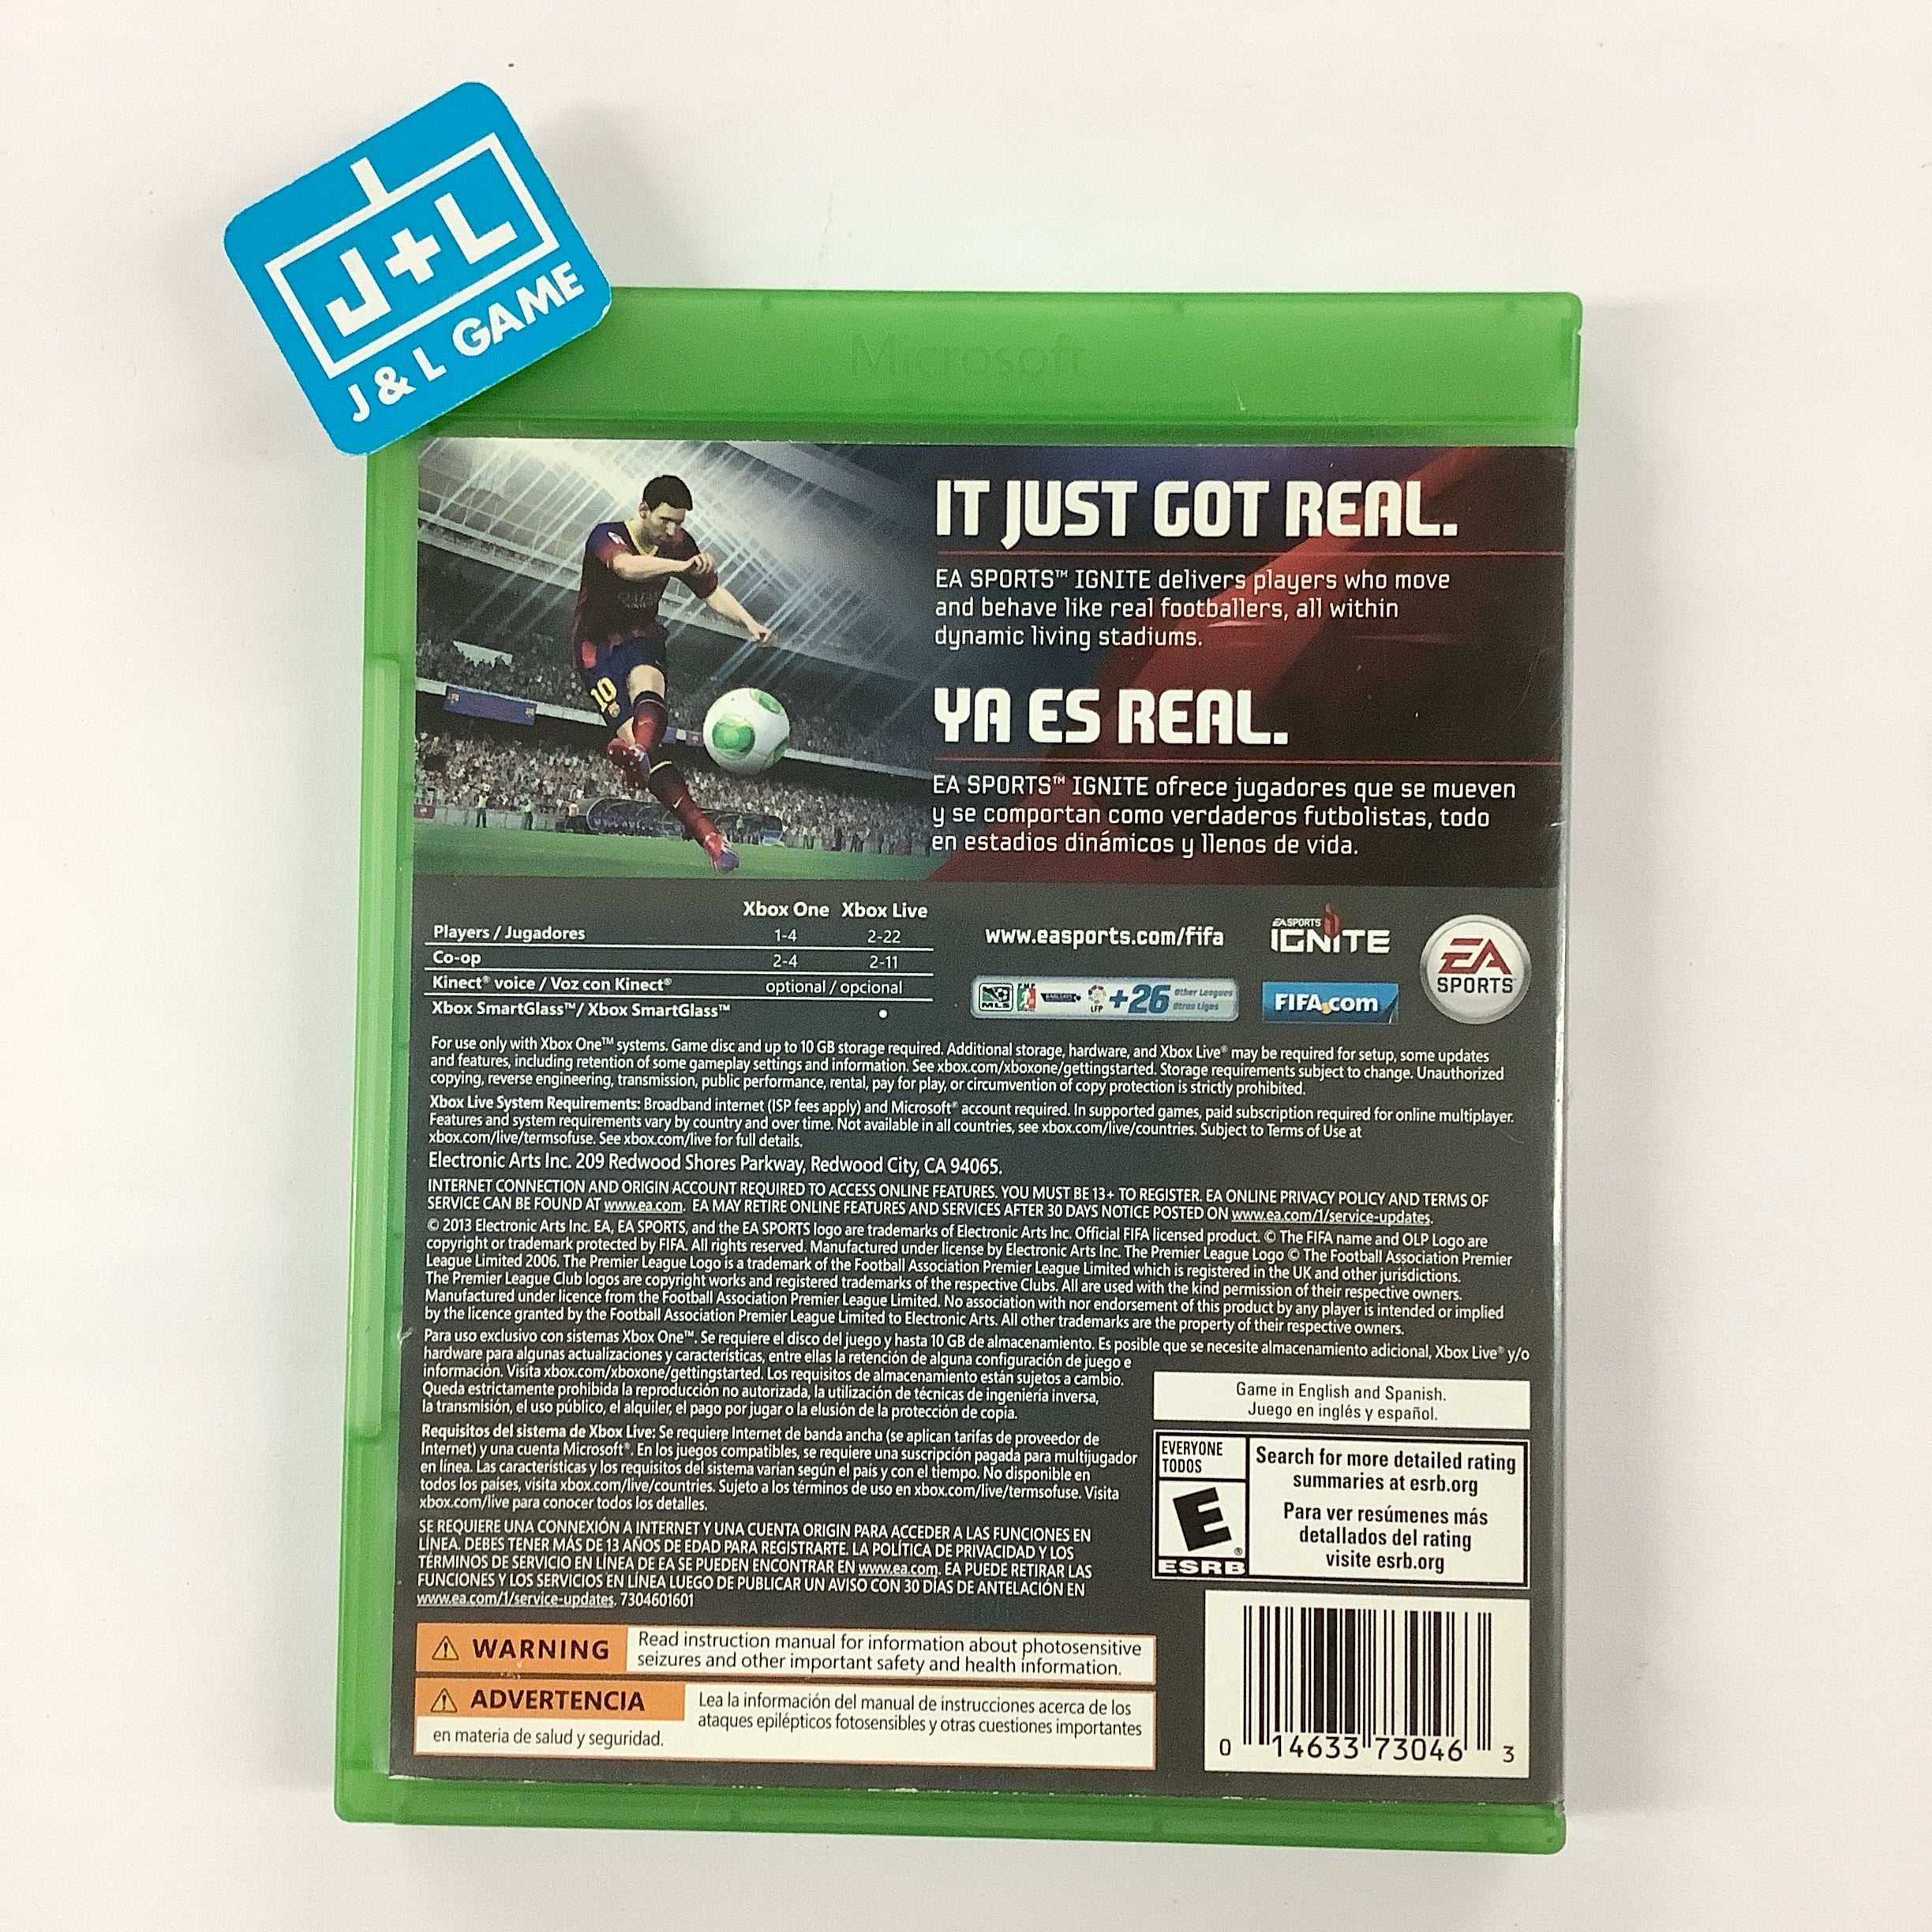 FIFA 14 - (XB1) Xbox One [Pre-Owned] Video Games EA Sports   